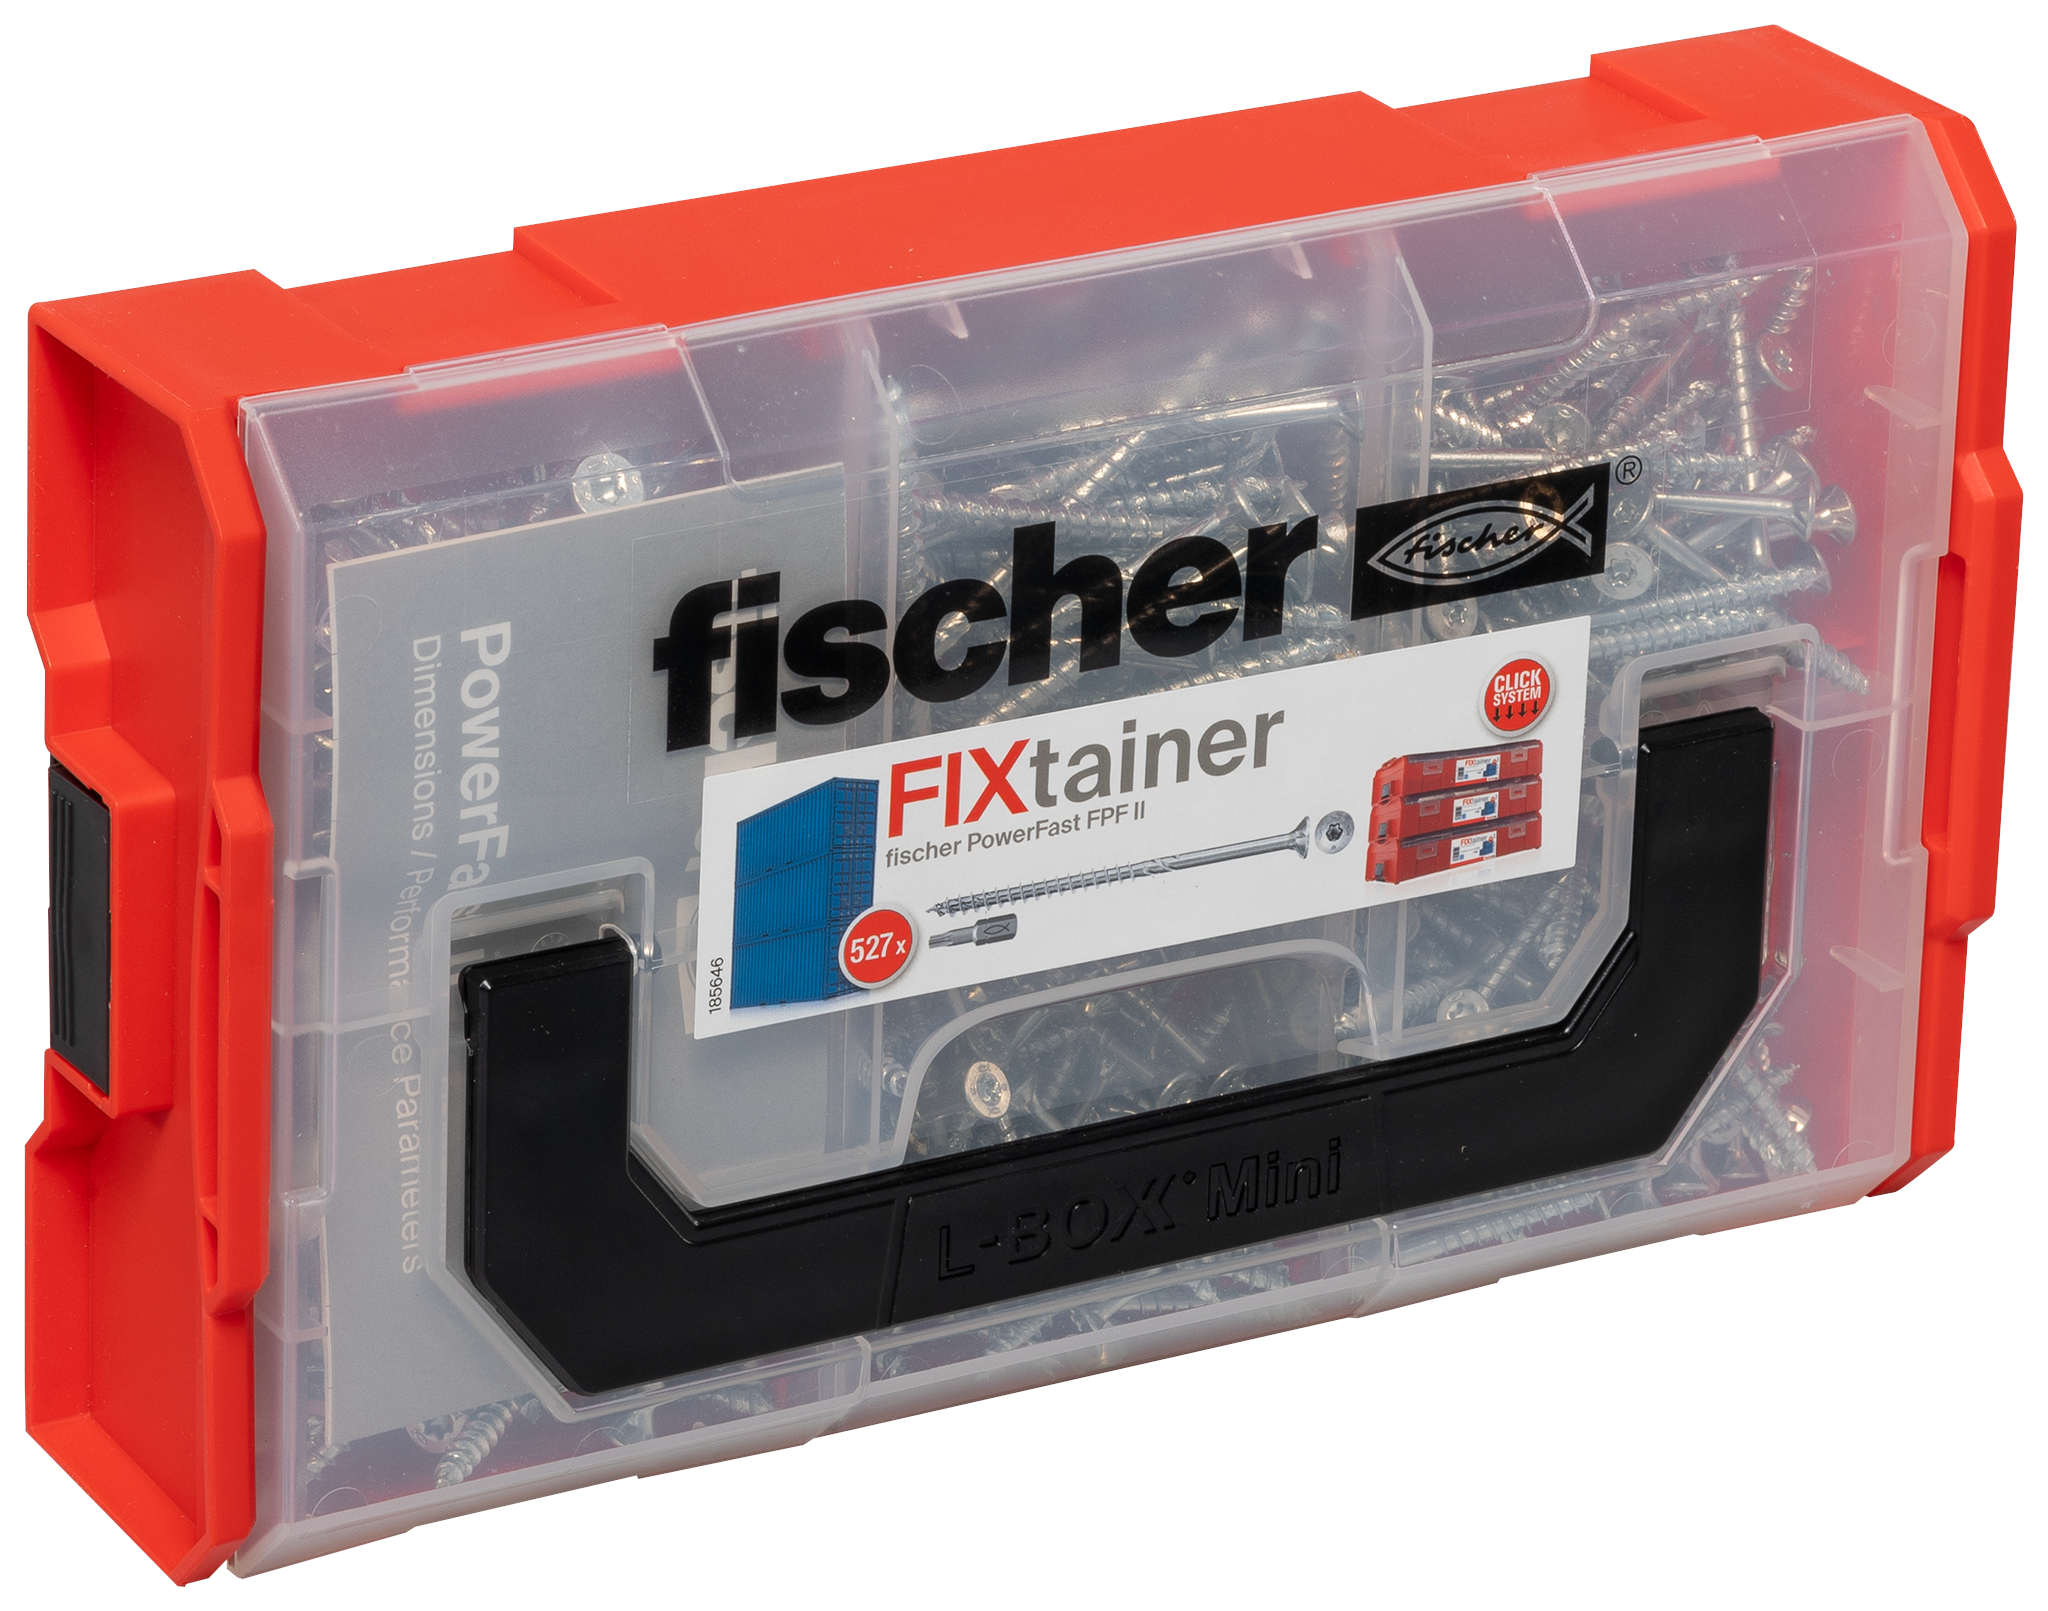 Picture of FIXtainer - PowerFast II SK TG TX (527)